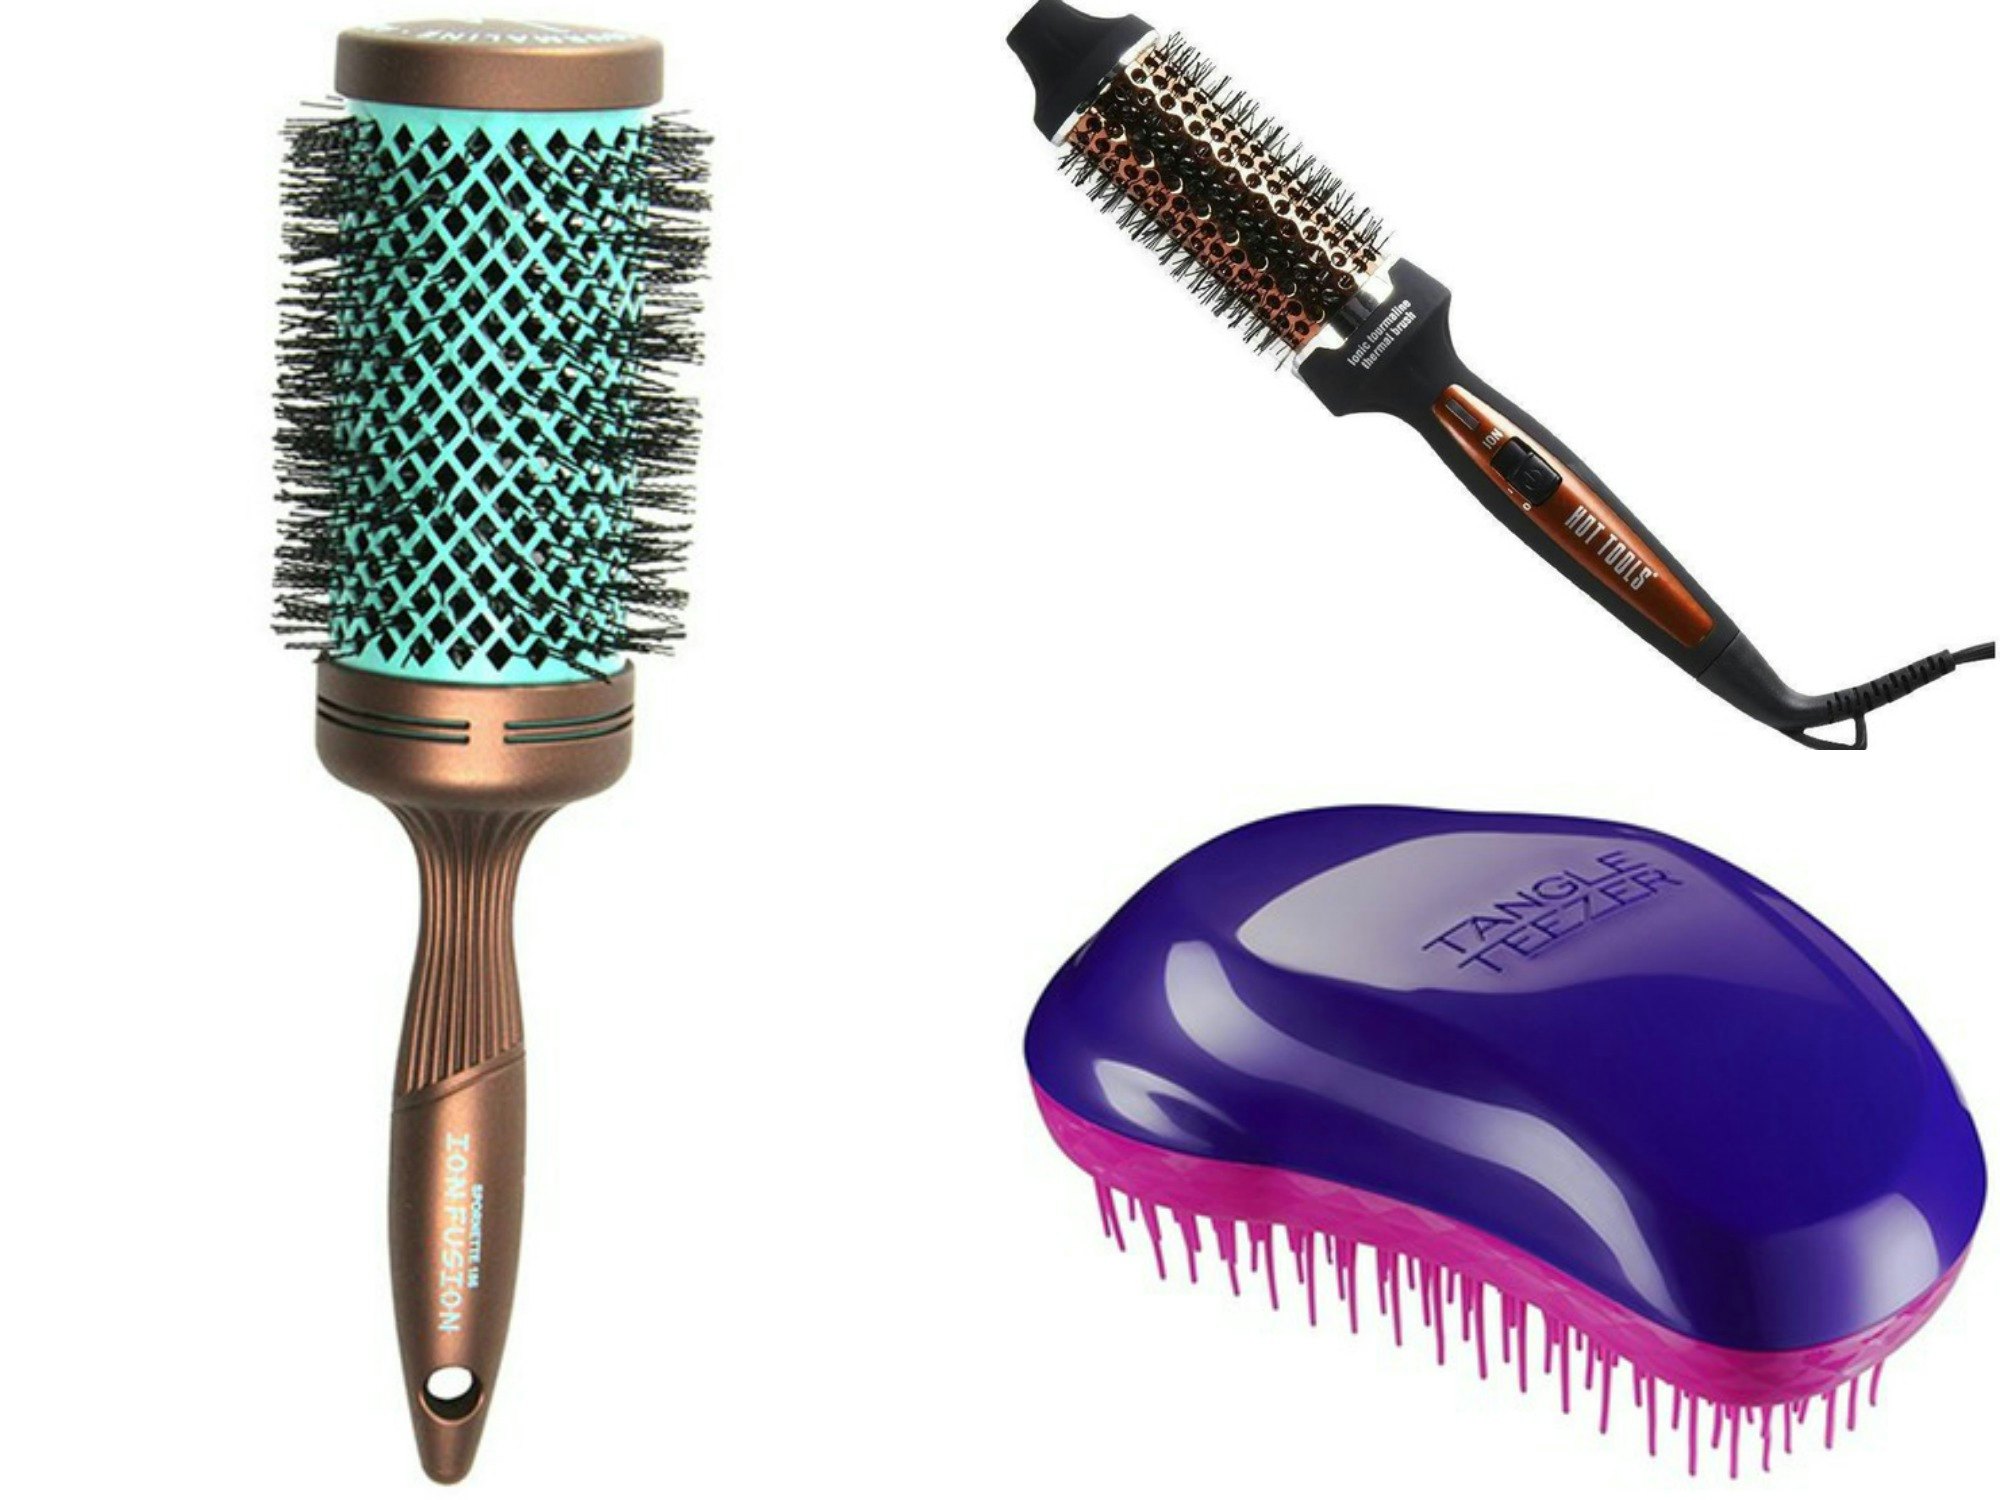 The 10 Hair Brushes With The Best Reviews On Amazon